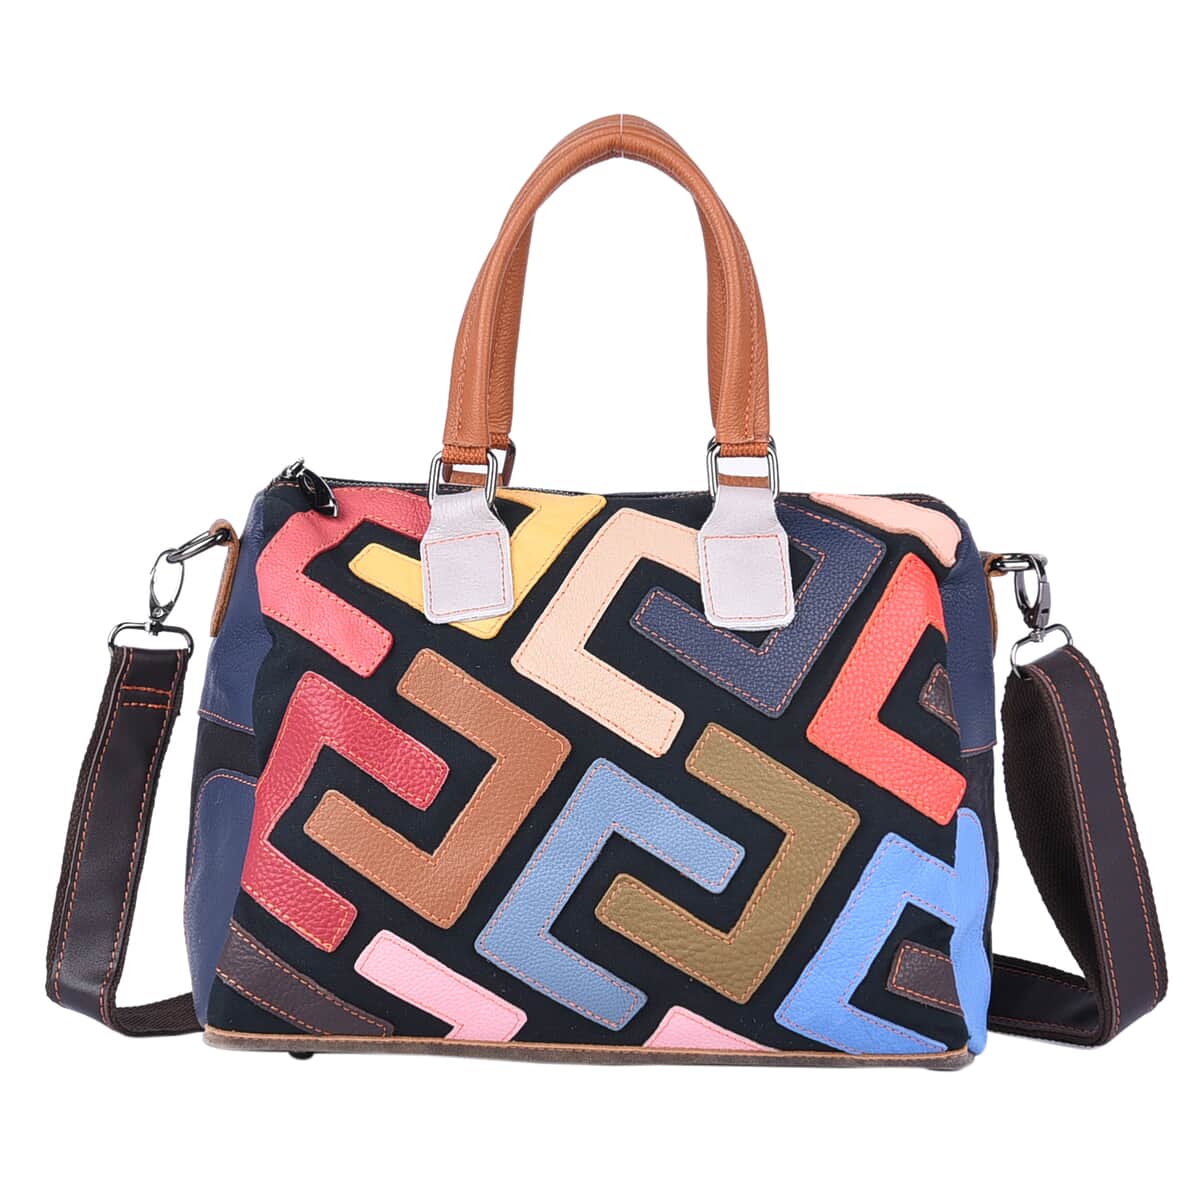 CHAOS BY ELSIE Multi Solid Color Fret Pattern Genuine Leather Convertible Tote Bag with Handle and Shoulder Straps (11.4"x4.72"x9.45") image number 0